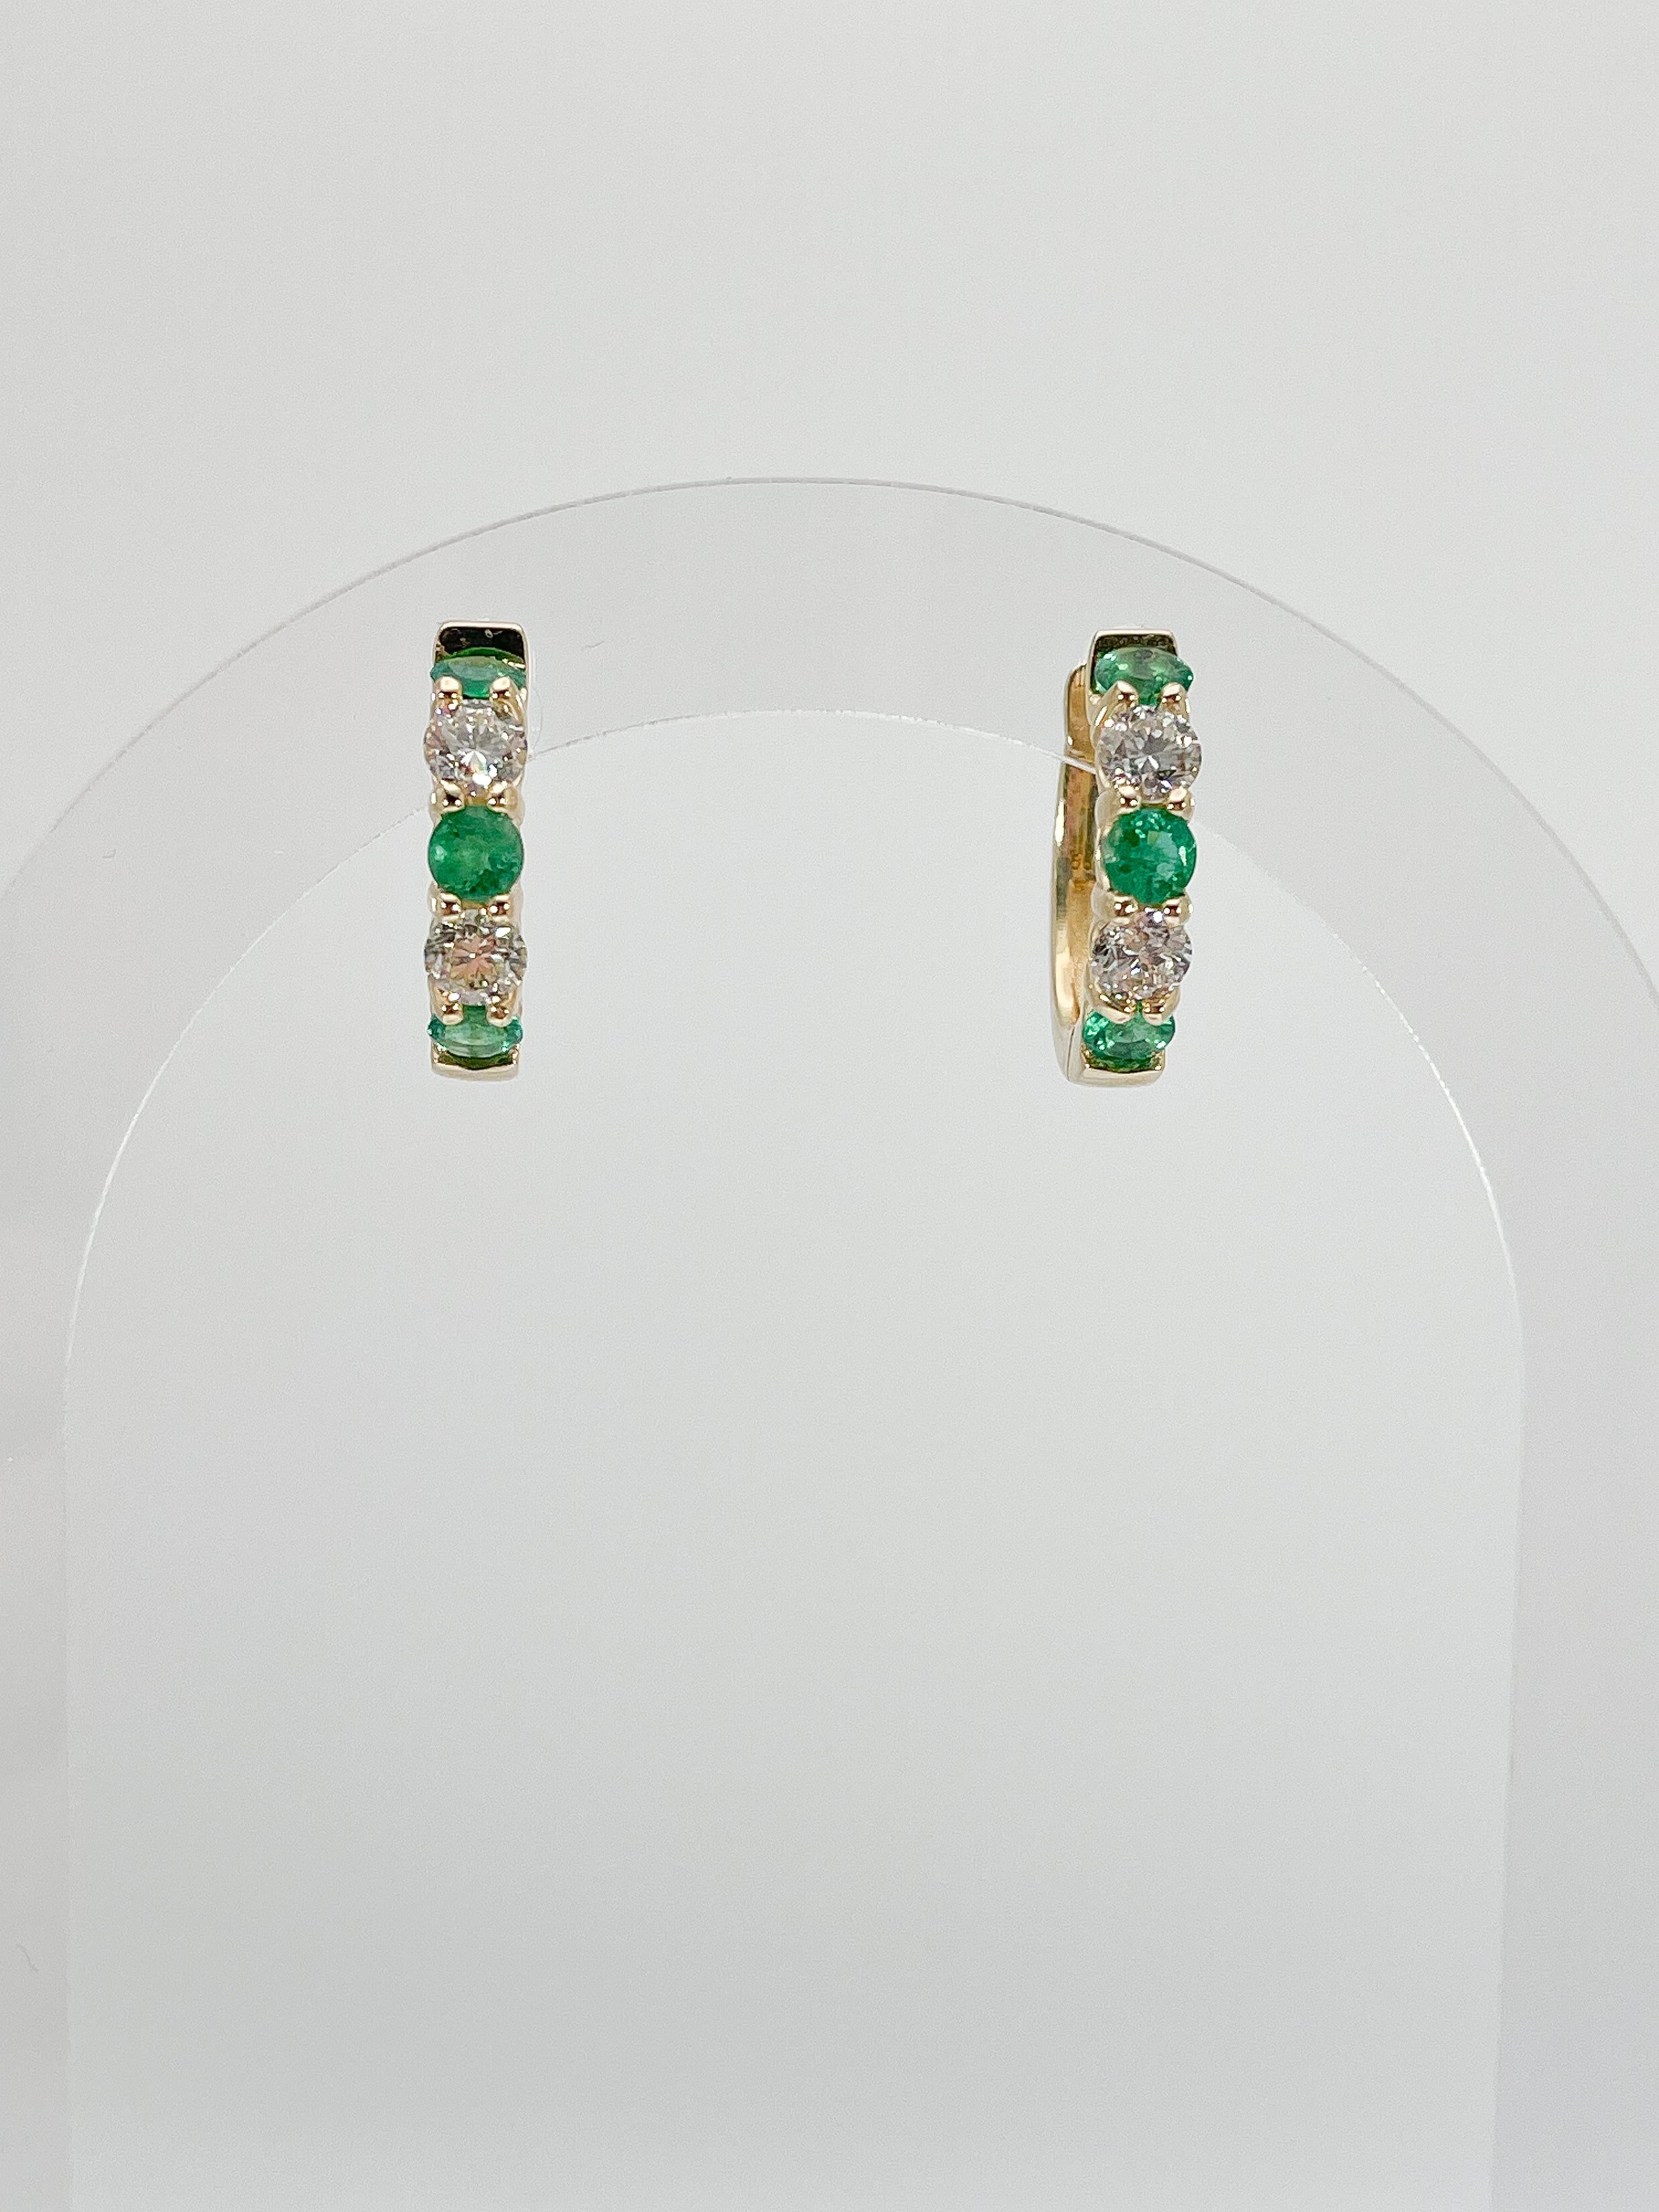 14k yellow gold 1.54 CTW emerald and 1.20 CTW diamond hoop earrings. The stones in these earrings are round, the measurements are 17.9 x 19.4, and they have a total weight of 6.26 grams. 